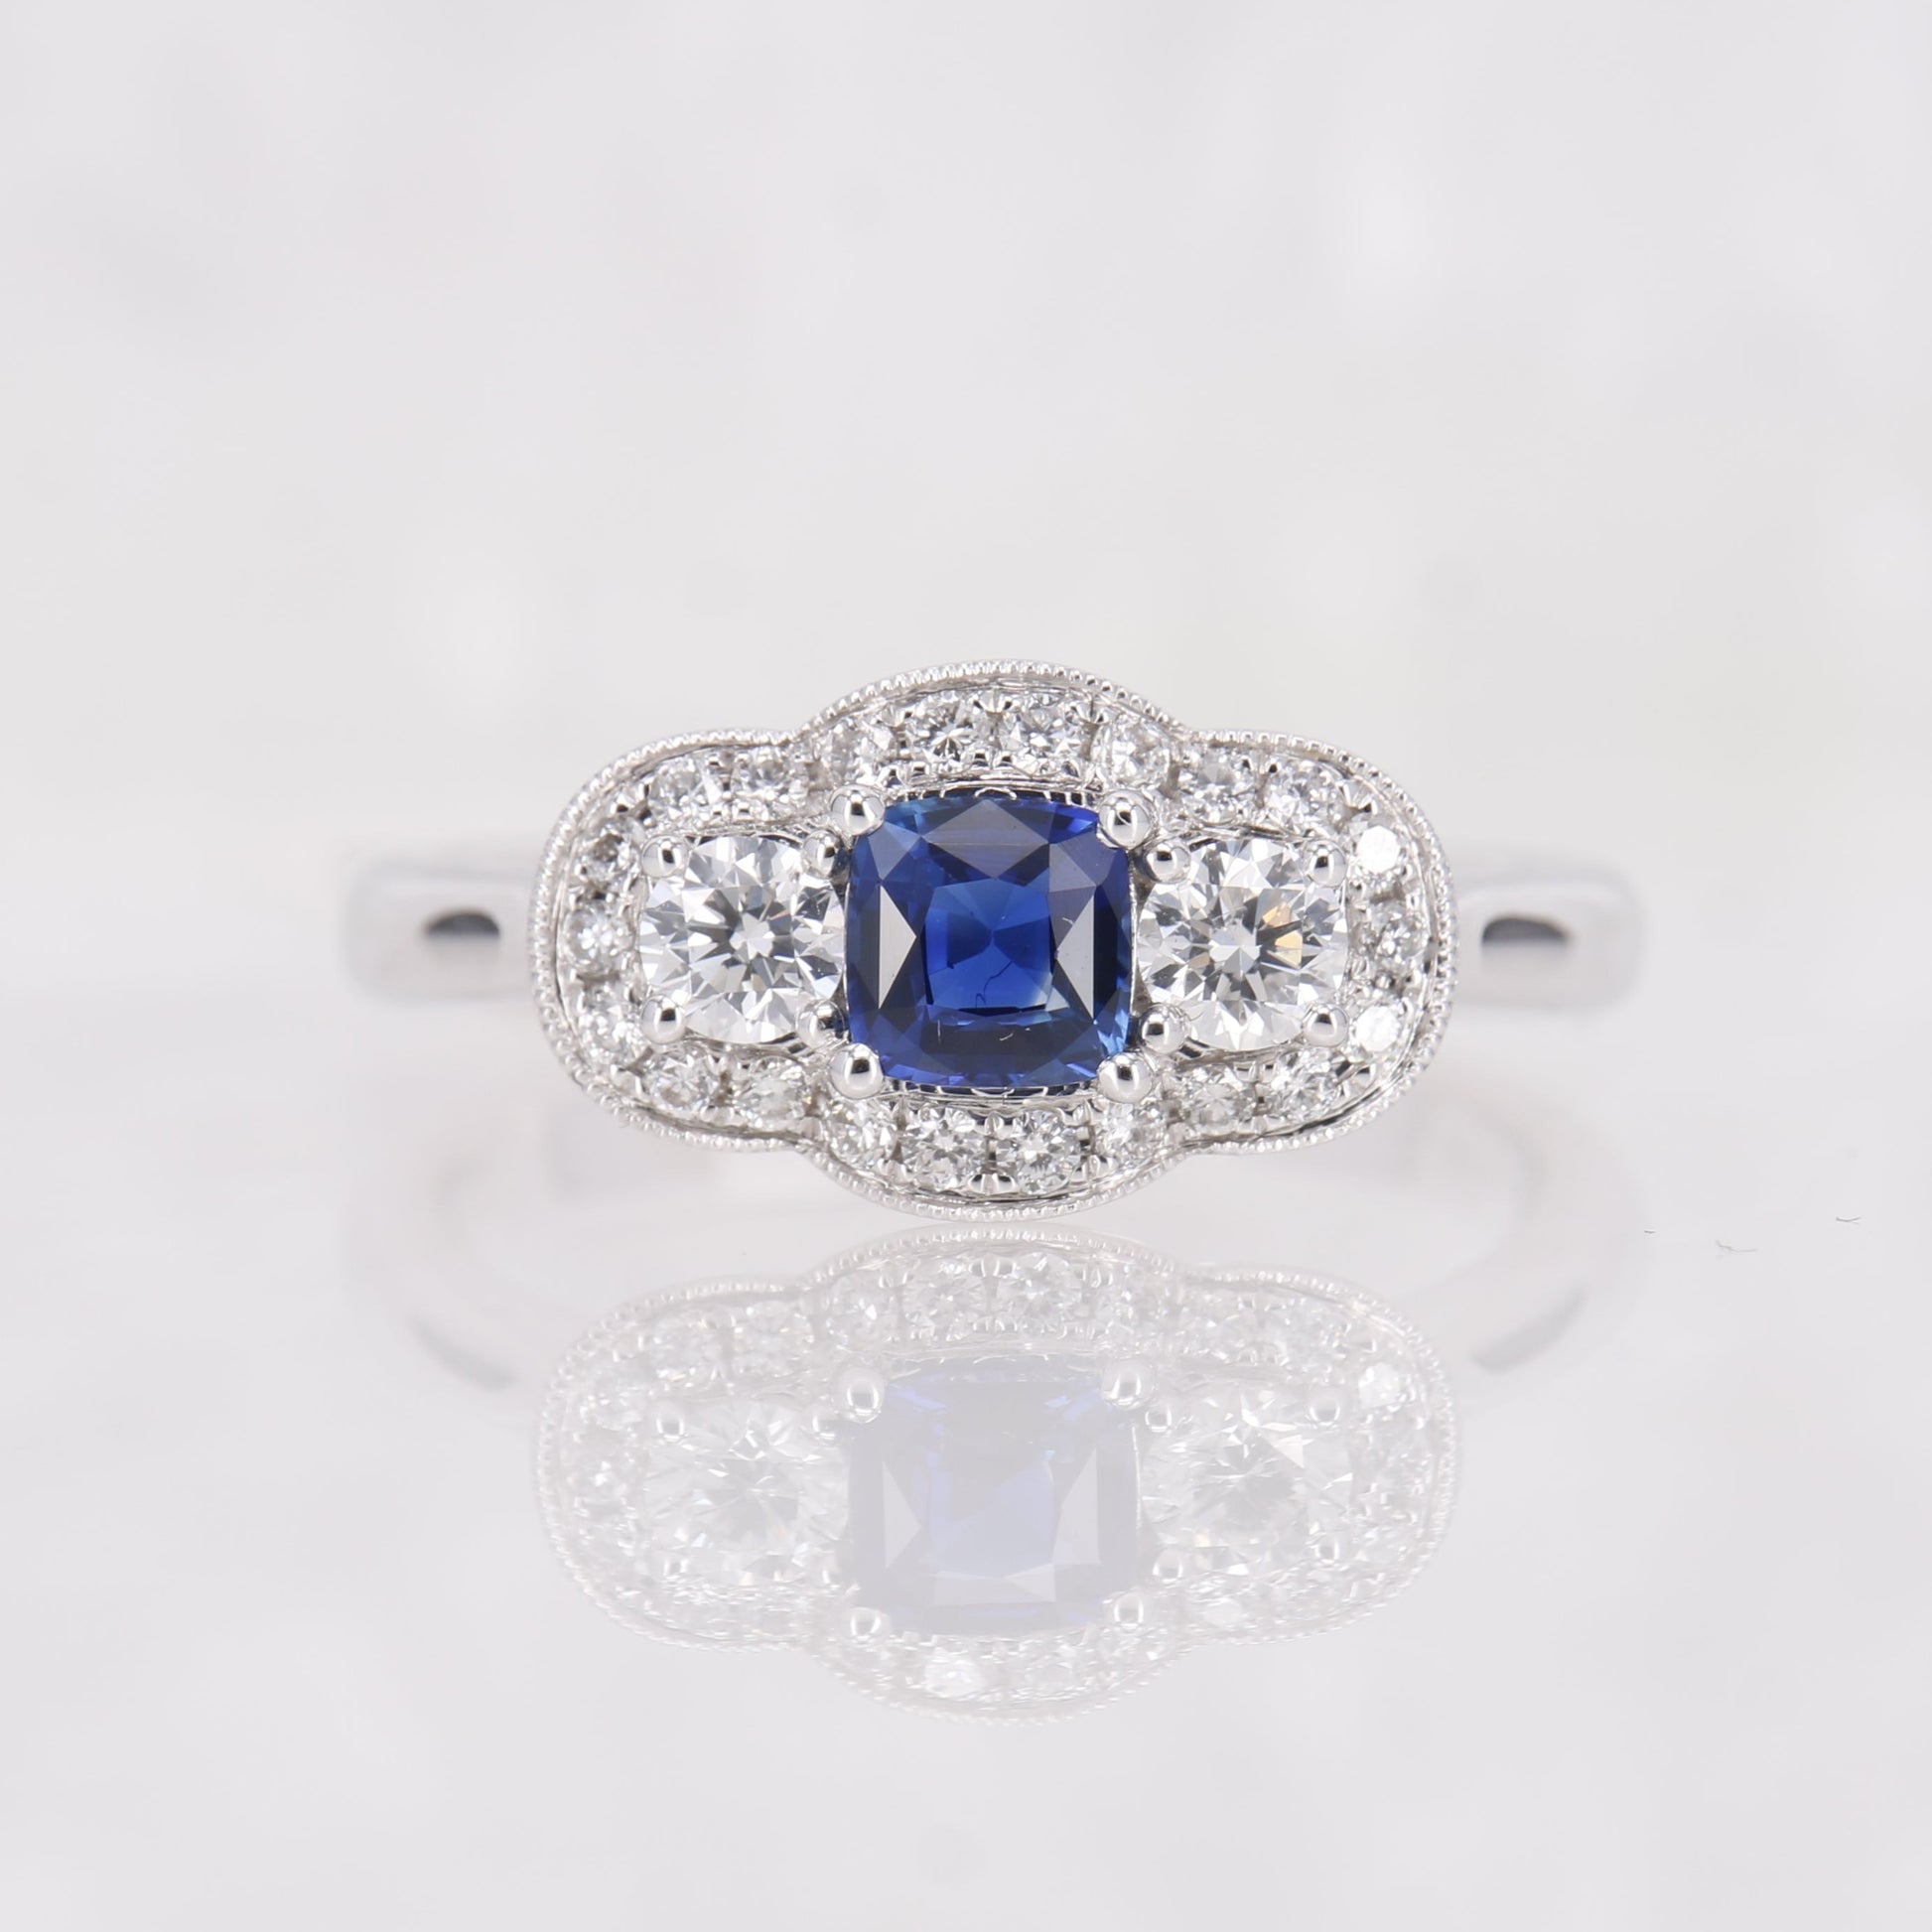 Sapphire and Diamond 3 stone ring. Cushion cut sapphire with round brilliant cut diamonds in a halo of diamonds. Set in 18ct White Gold. 